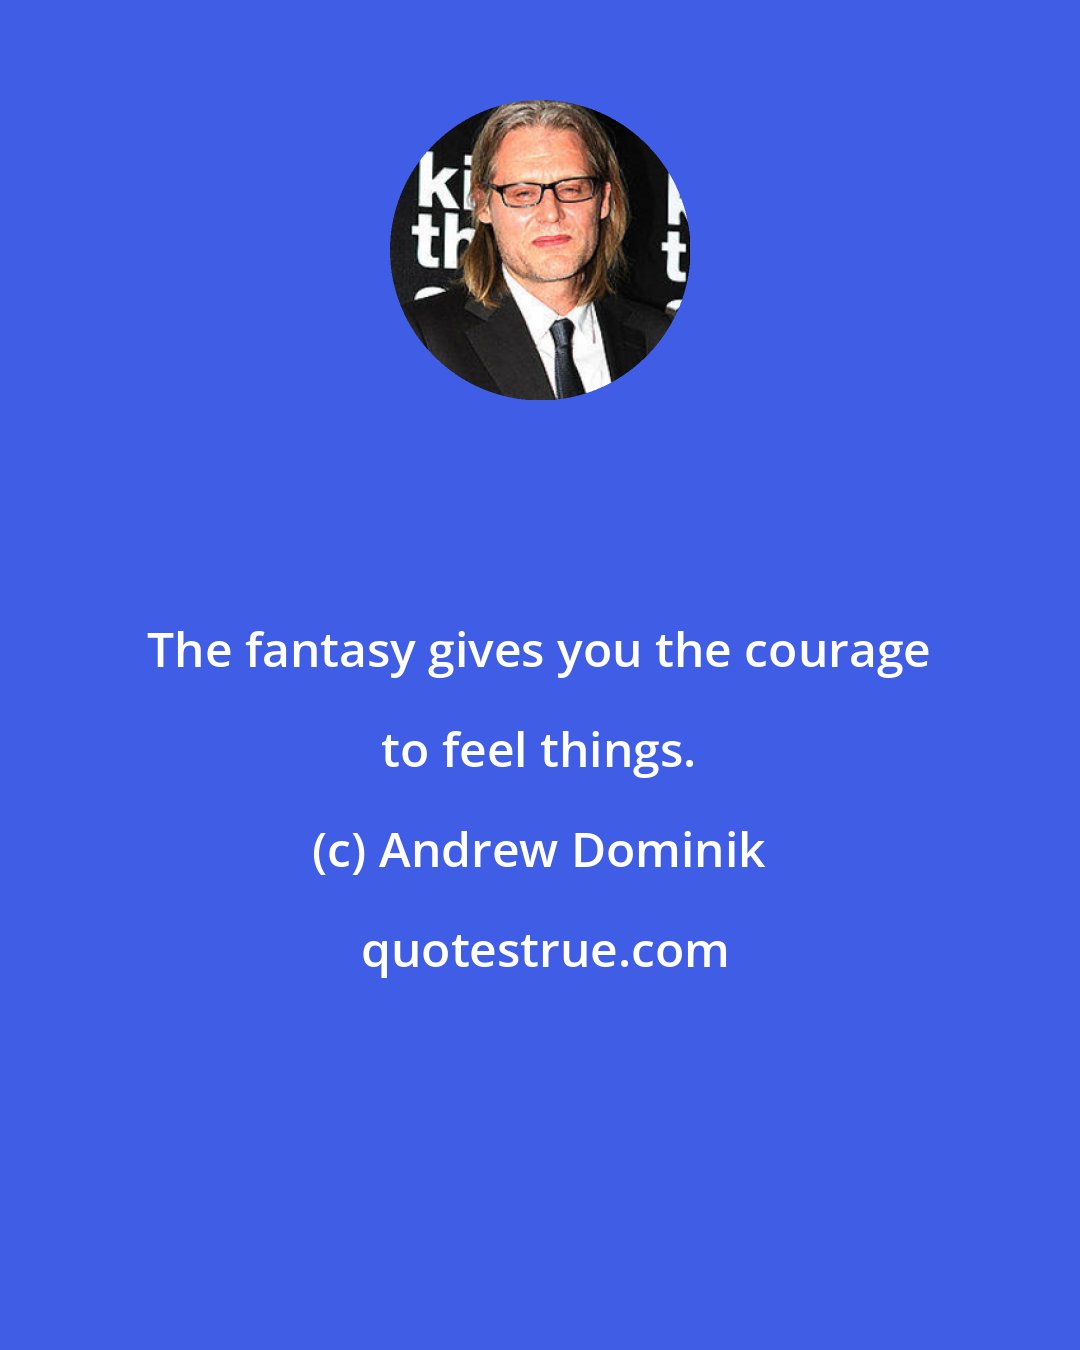 Andrew Dominik: The fantasy gives you the courage to feel things.